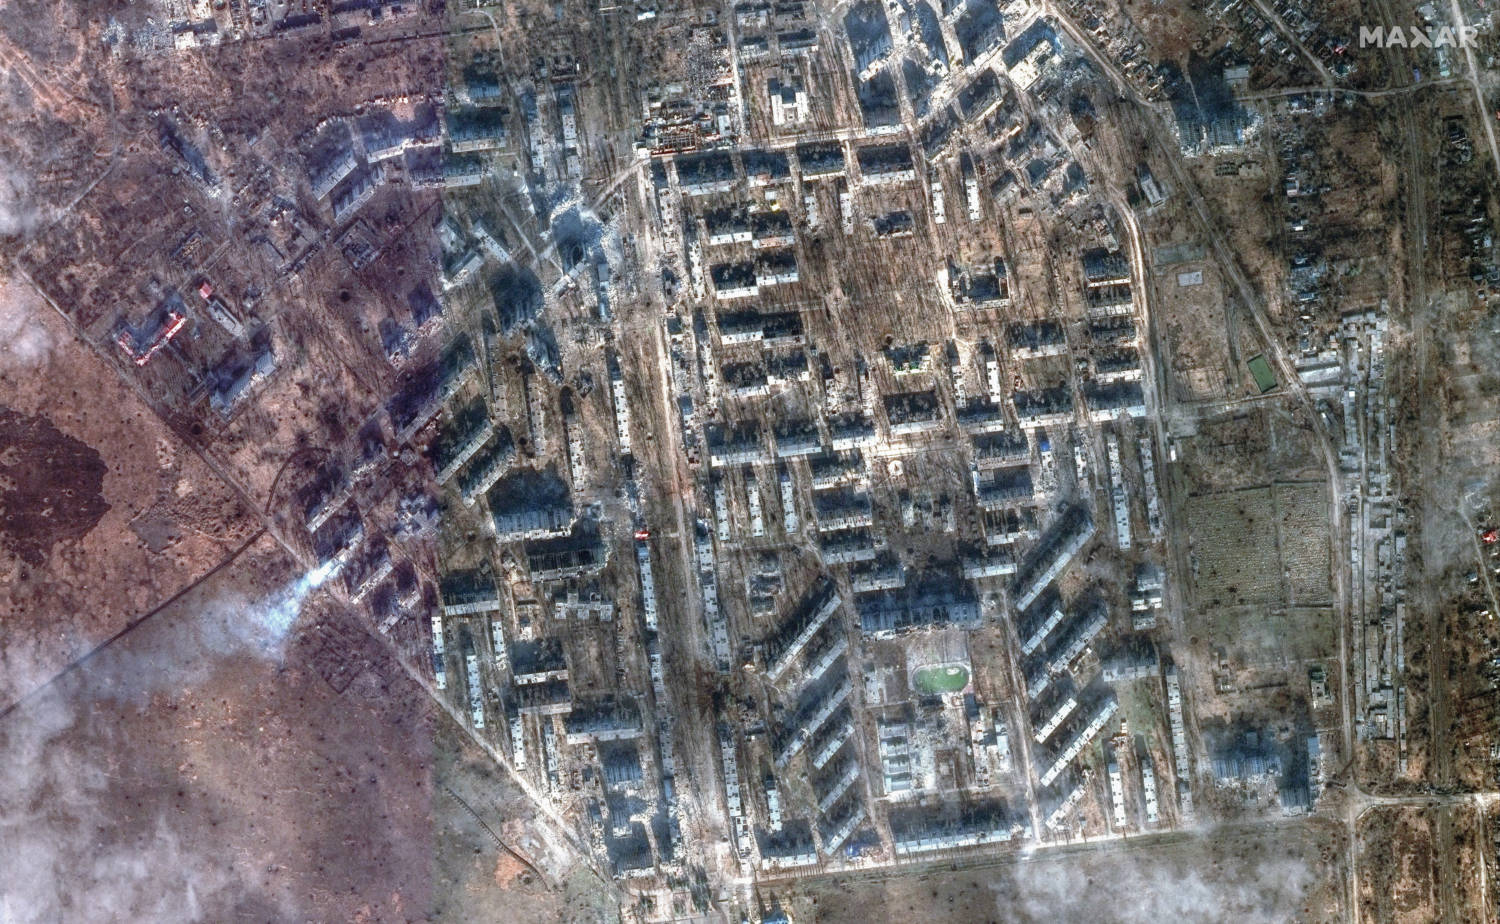 A Satellite Image Shows An Overview Of The City Of Avdiivka